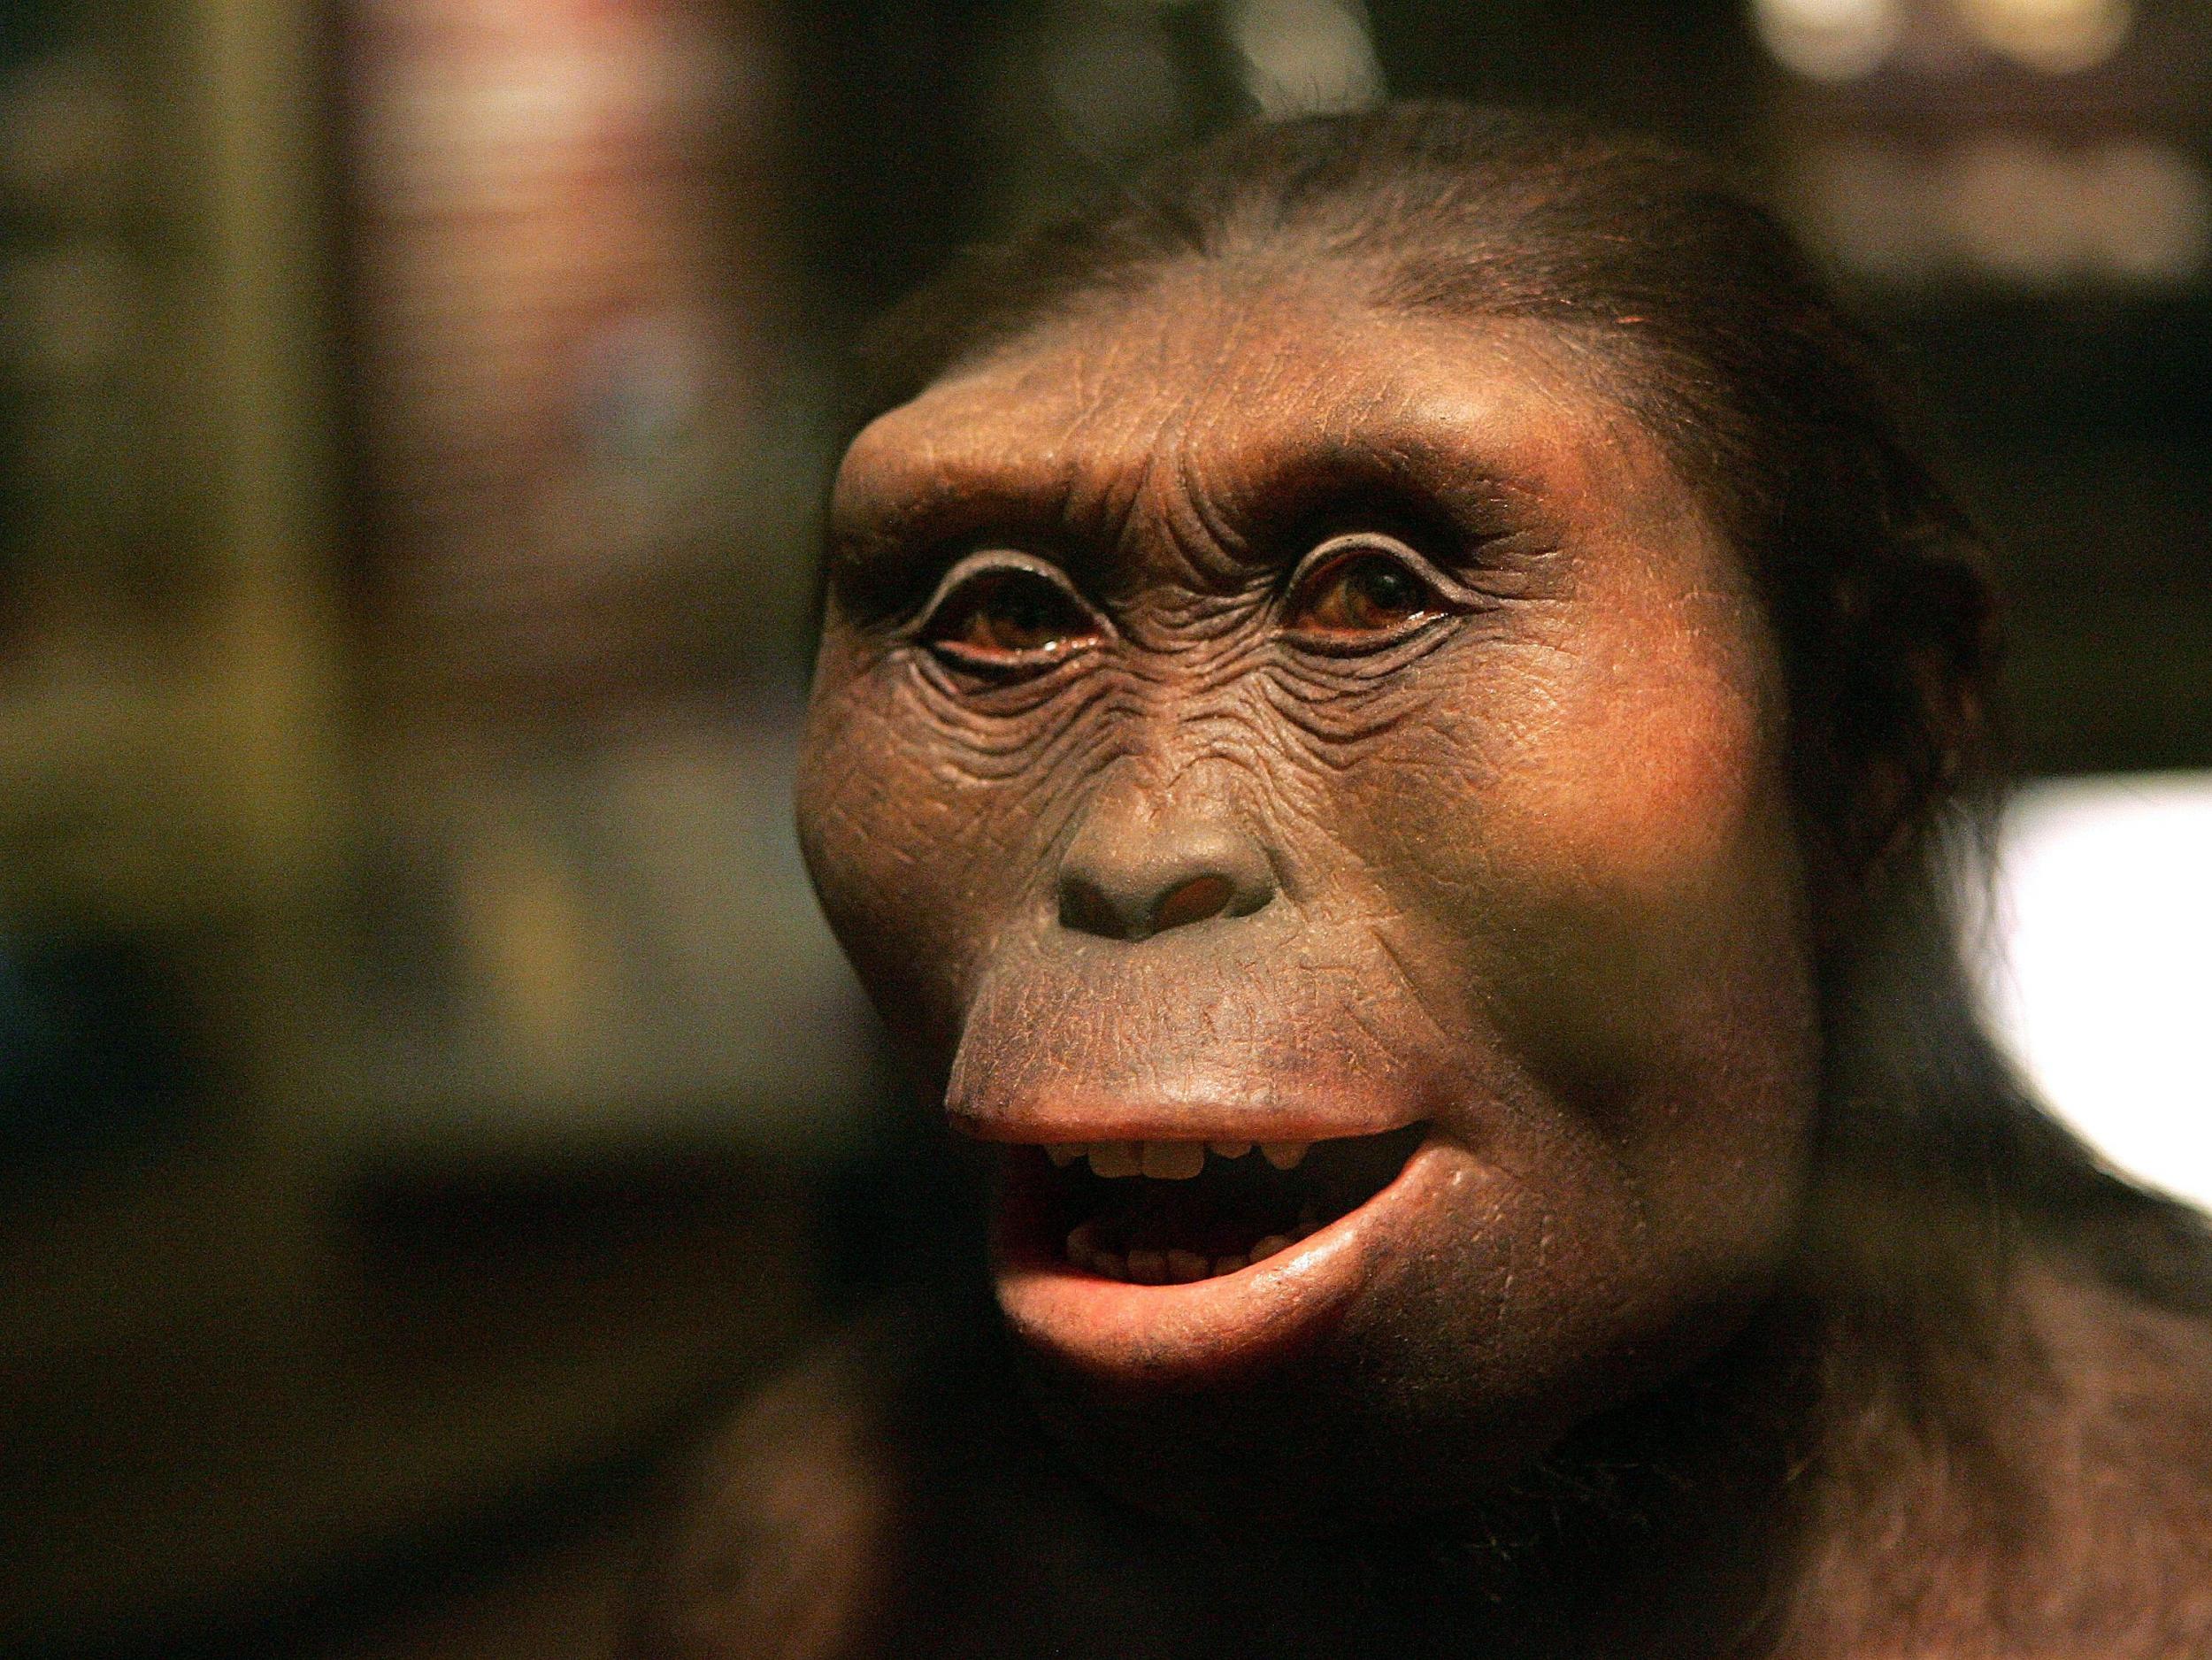 Who Is Lucy The Australopithecus How Related Are You To The 3 2 Million Year Old Hominid The Independent The Independent